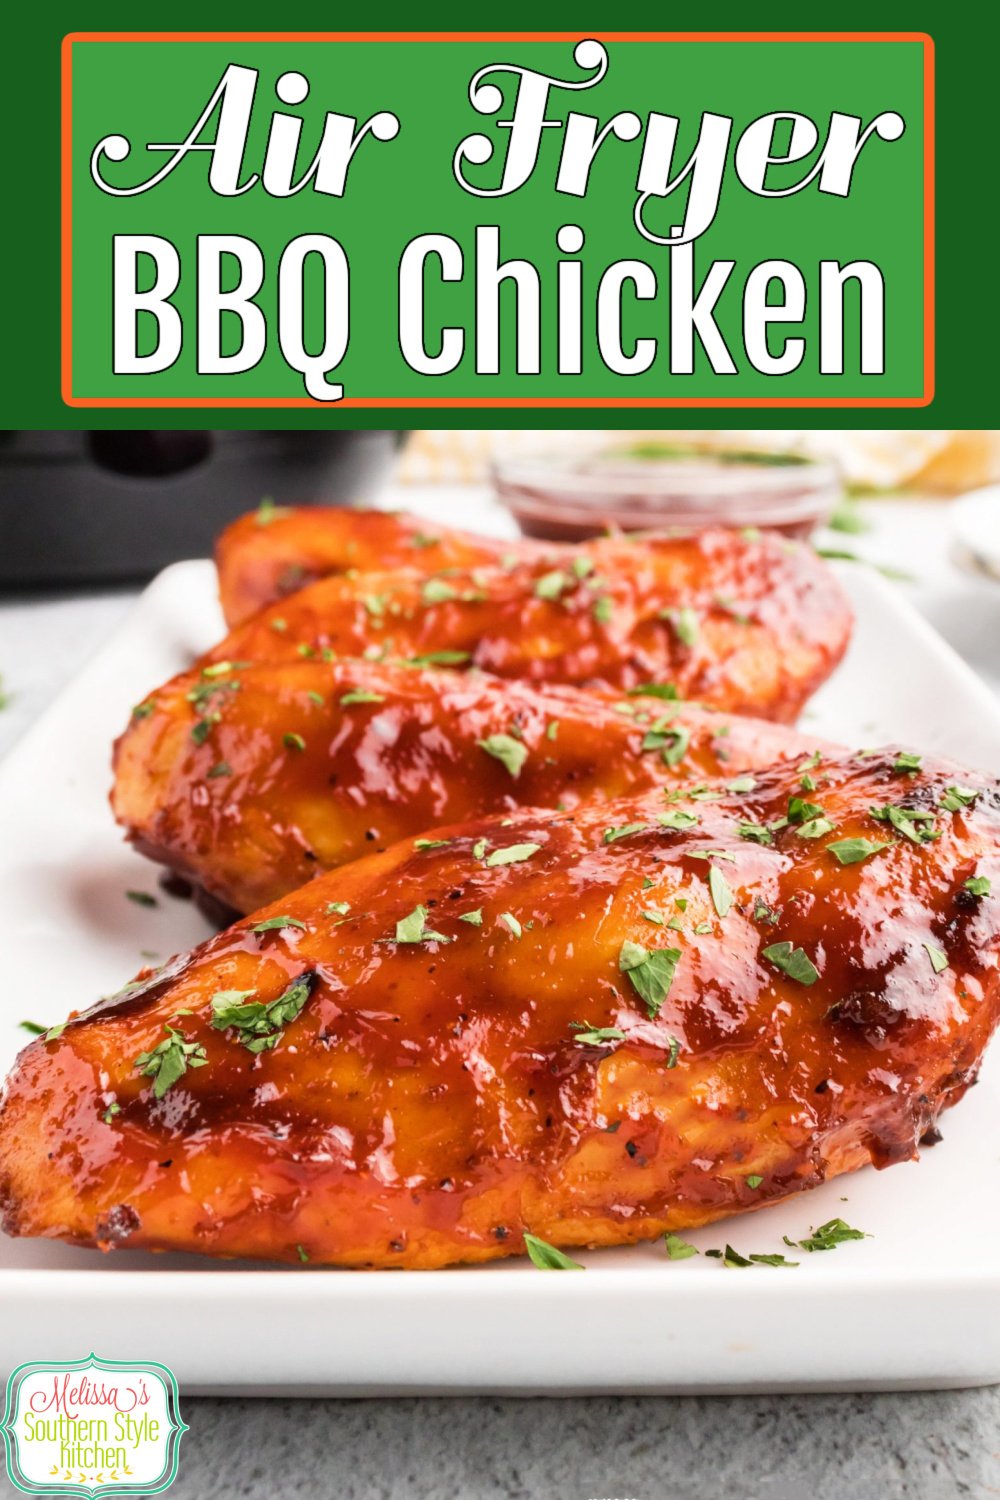 Pair these juicy Air Fryer Barbecue Chicken Breasts with your favorite side dishes for the perfect busy day dinner entrée #airfryerchicken #barbecuechickenrecipes #airfryerbarbecuechicken #easychickenbreastrecipes #chickenbreasts #bbqrecipes #easyairfryerchickenrecipes via @melissasssk